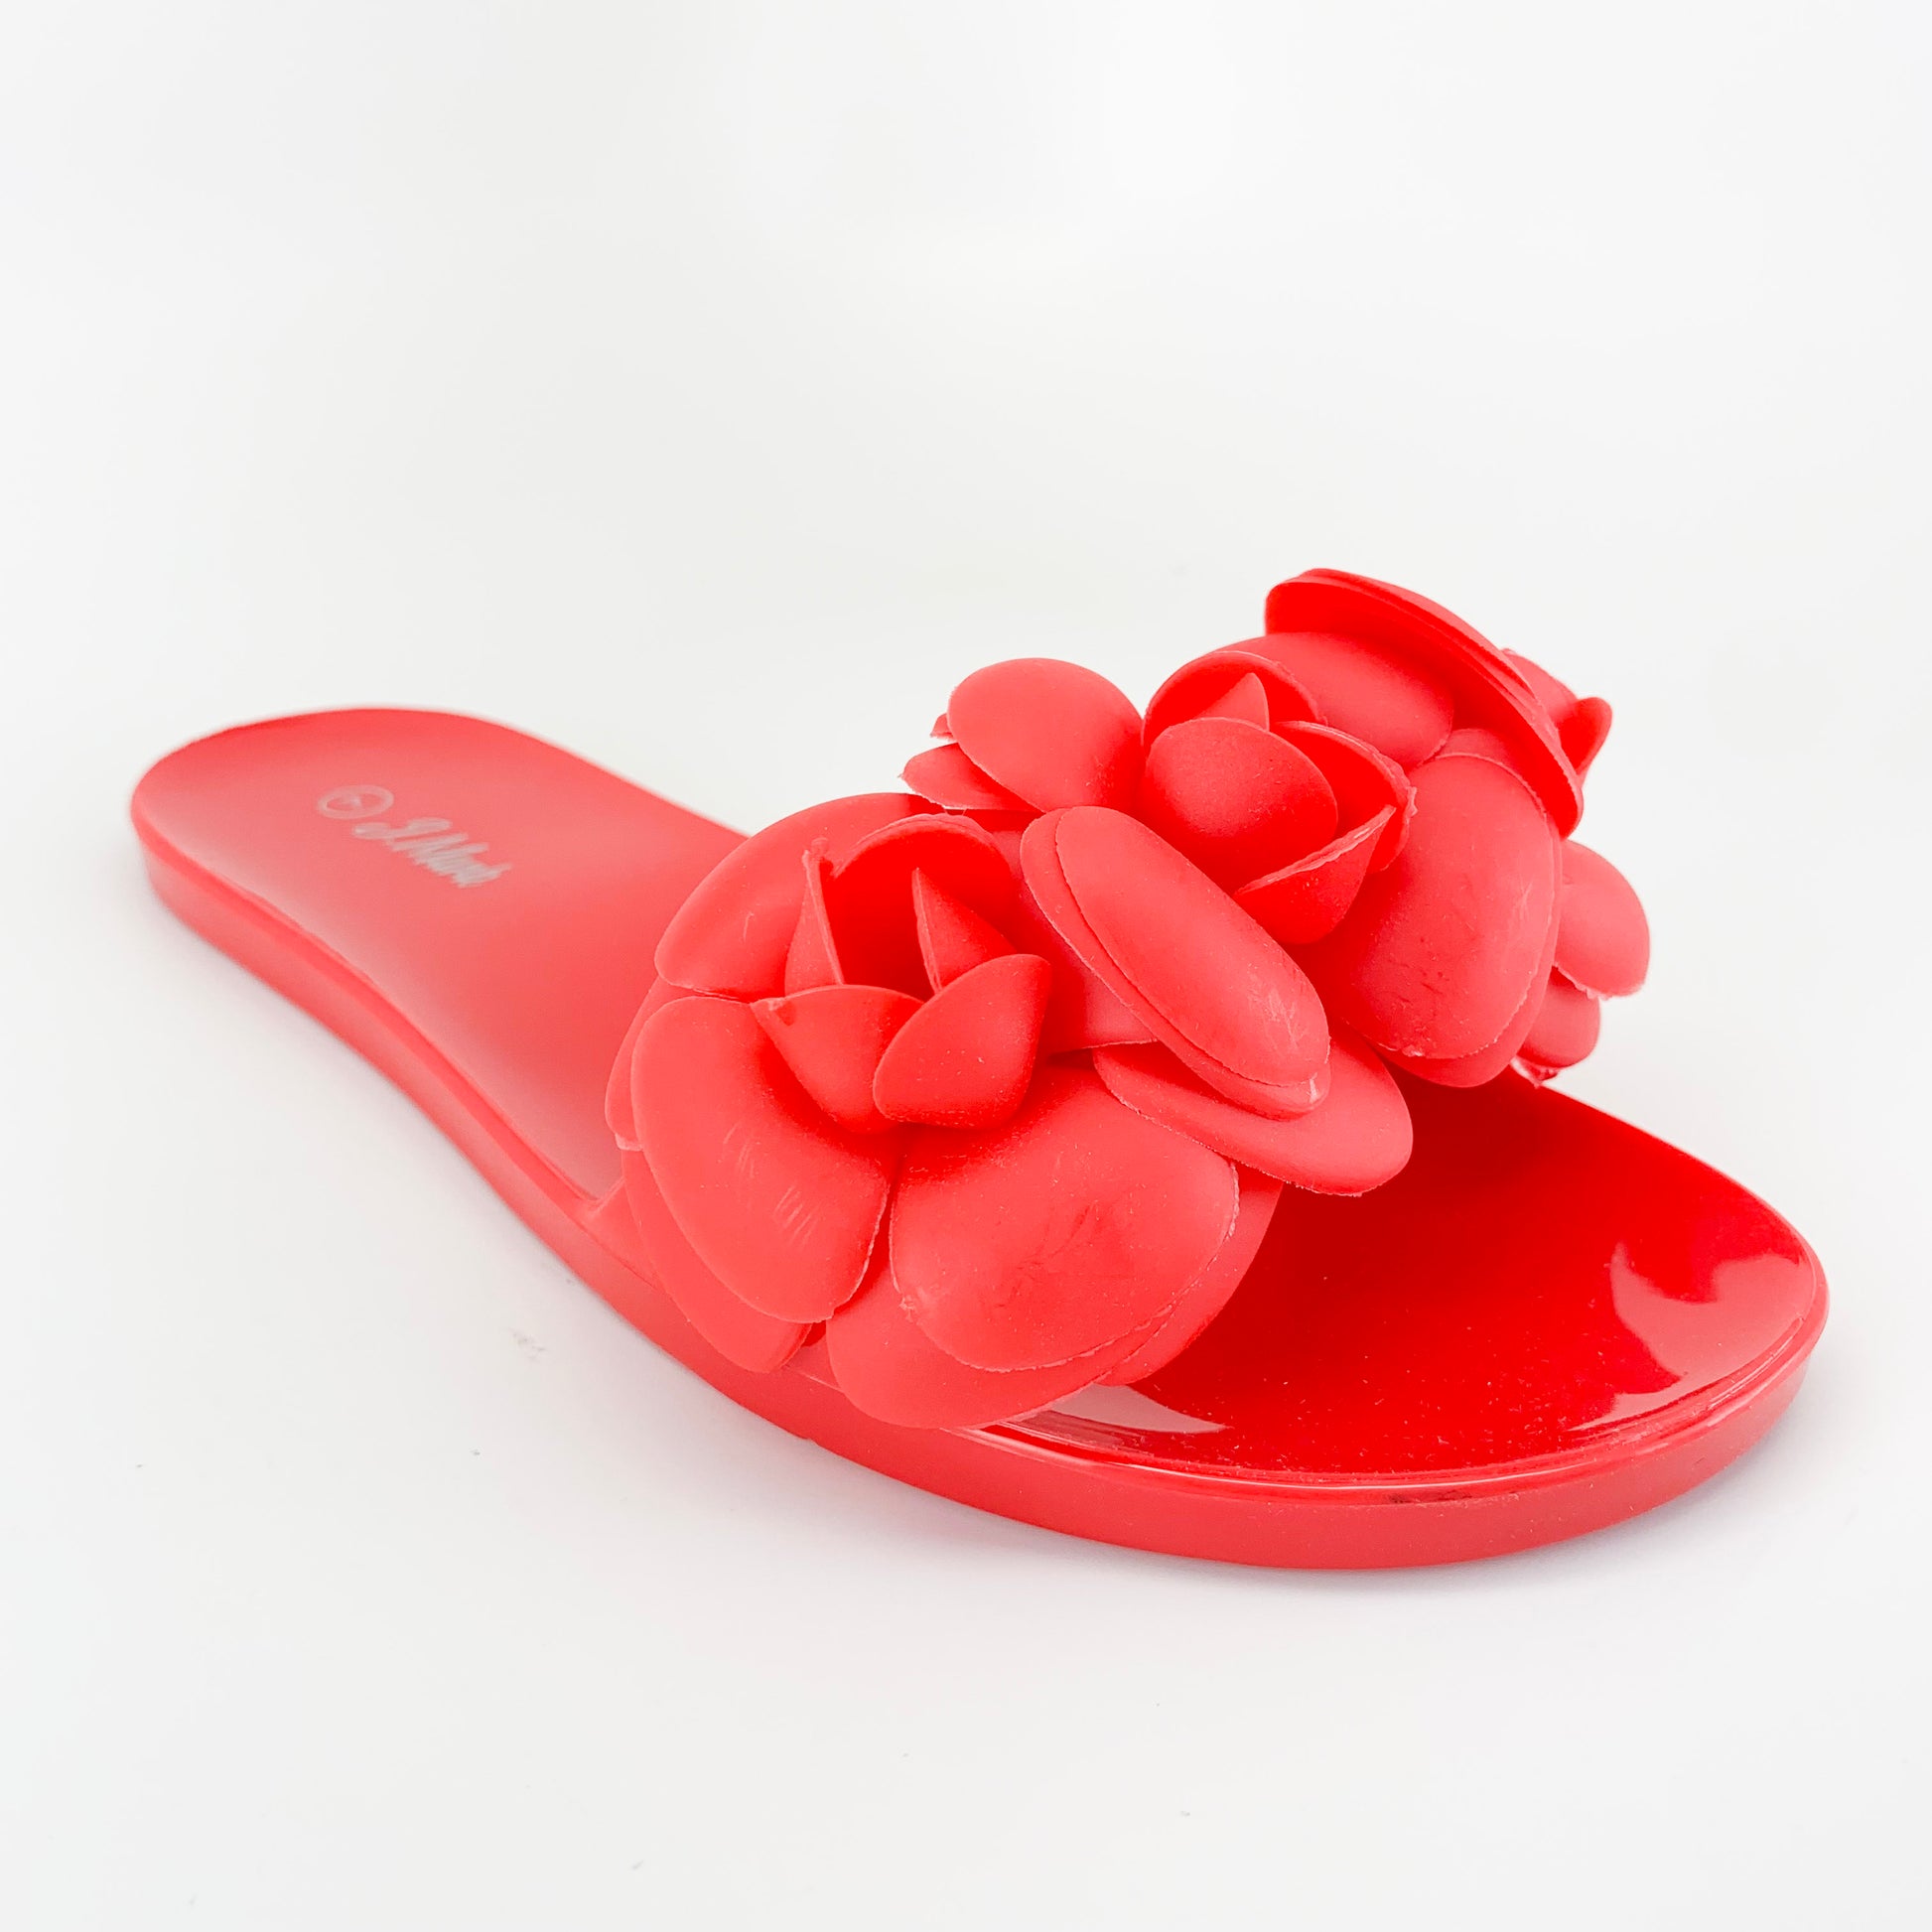 sbup jelly-07 red floral jelly sandal